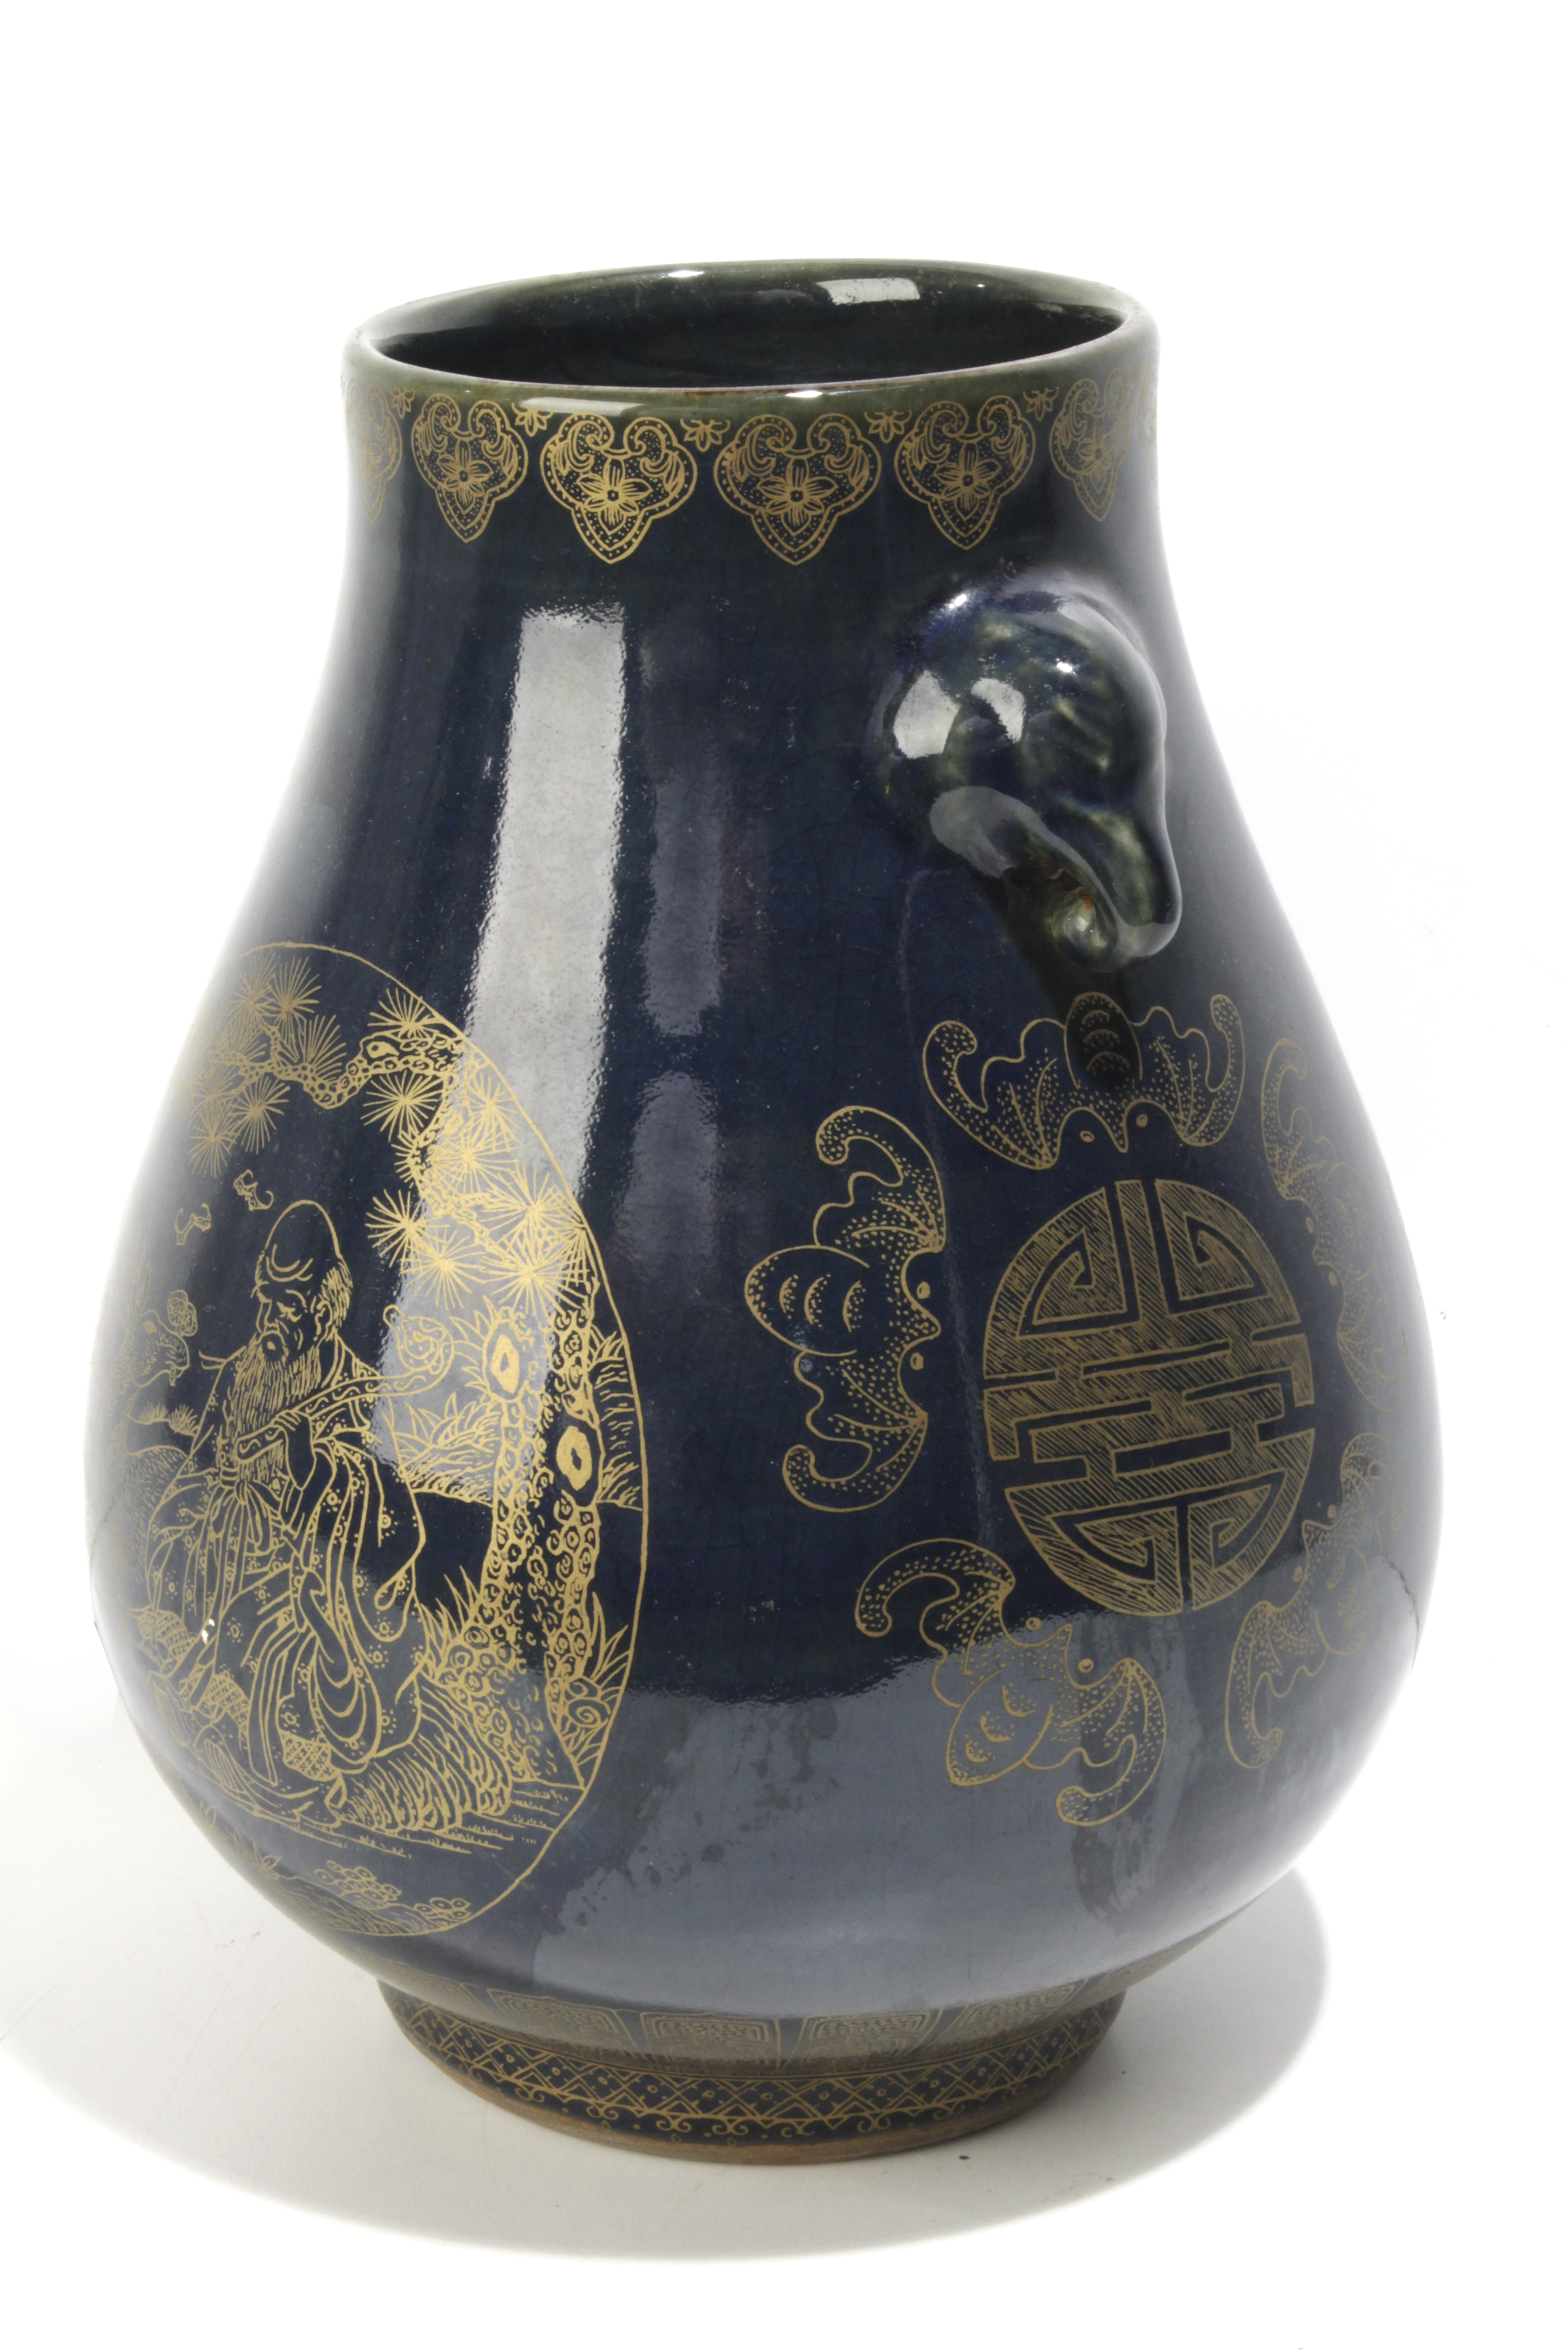 A 20th century Chinese porcelain vase - Image 2 of 3